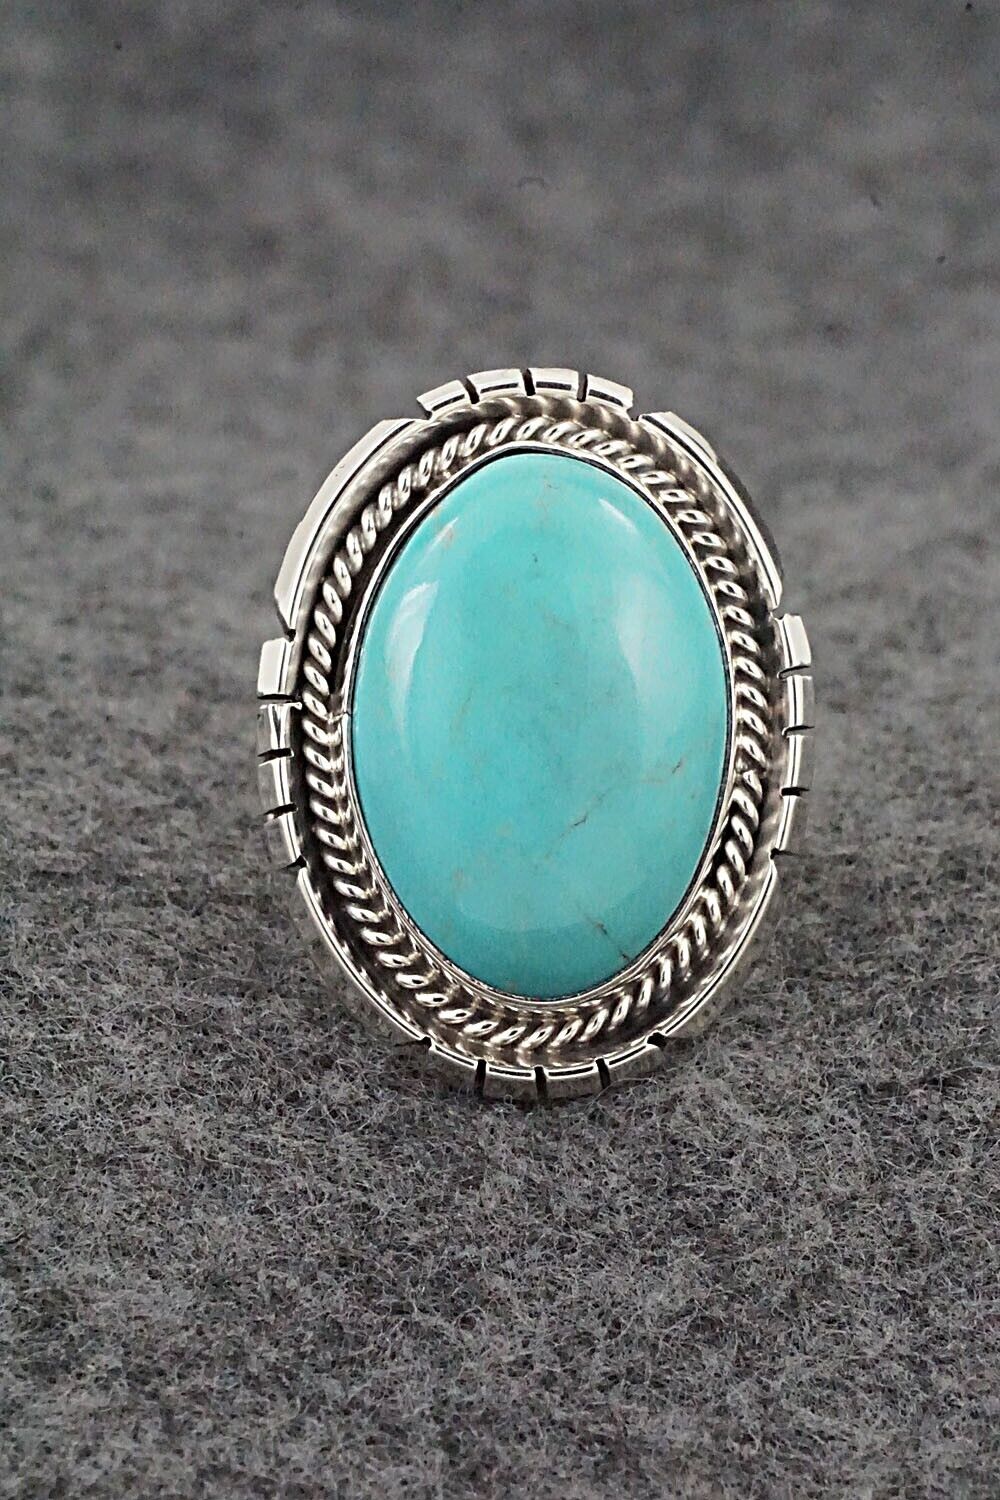 Turquoise & Sterling Silver Ring - Samuel Yellowhair - Size 9